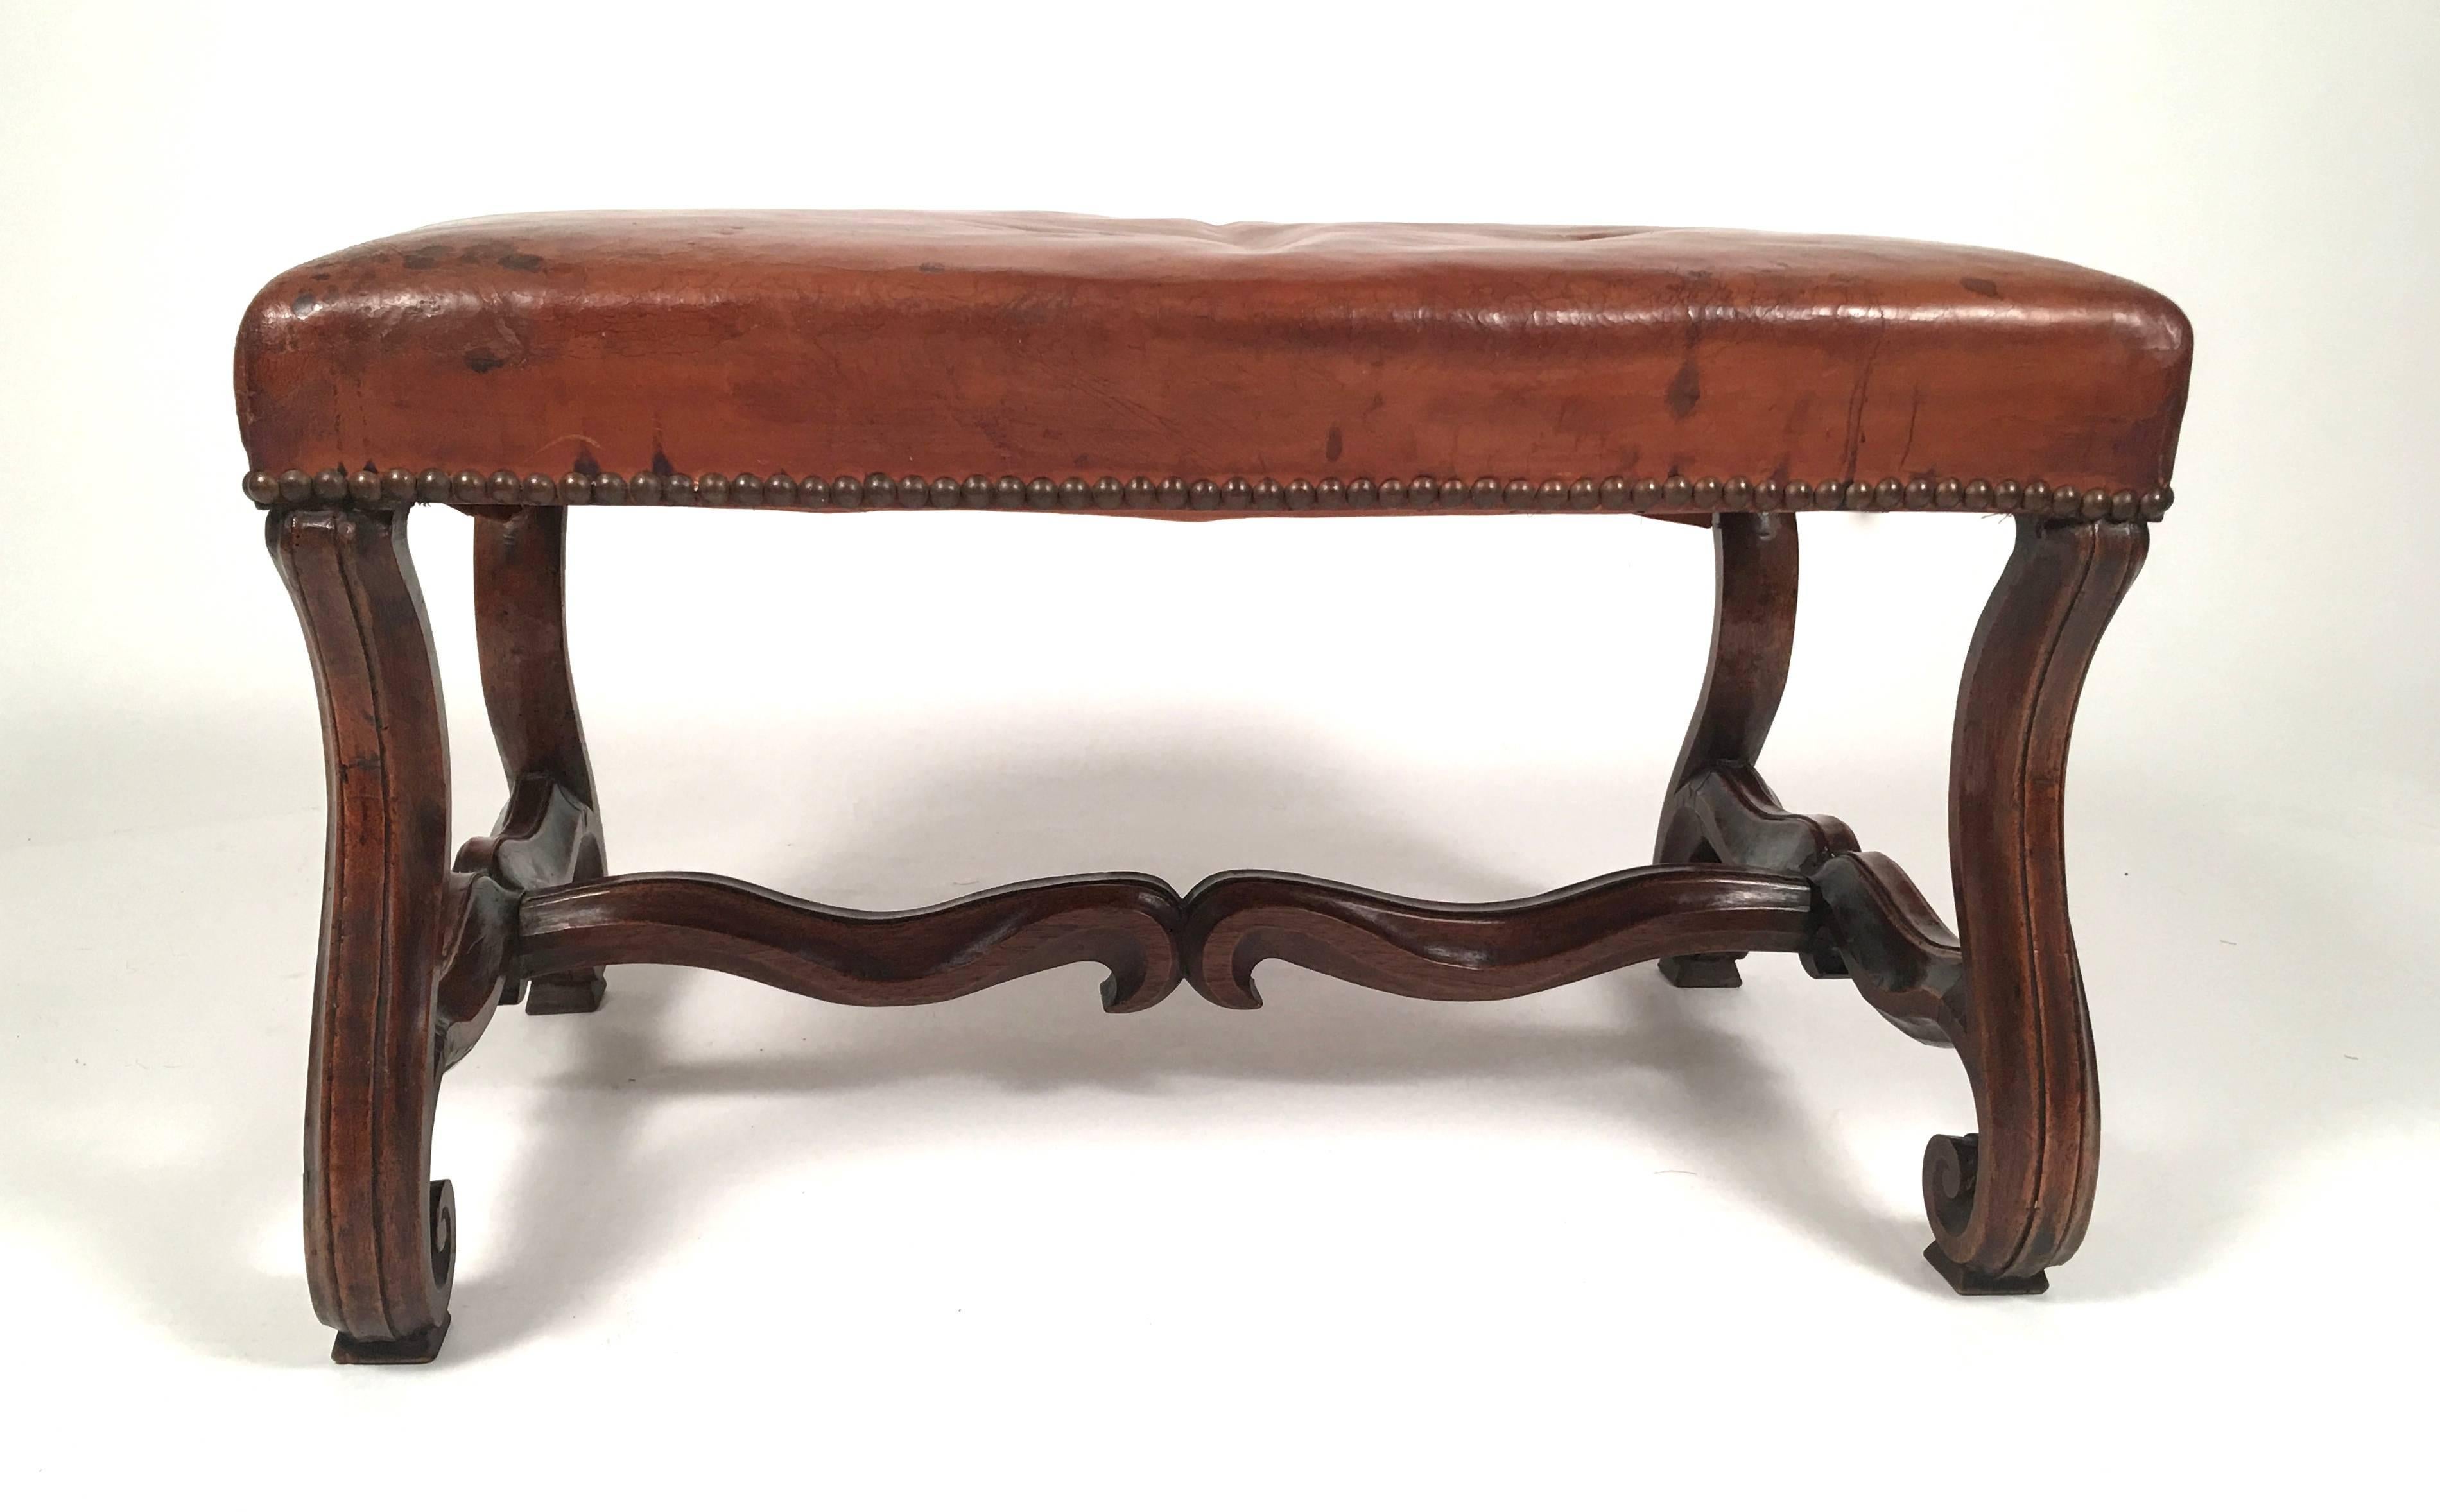 A French Louis XIV style Os de Mouton (literally sheep's bone) carved walnut ottoman, bench, or footstool with well patinated old leather upholstery and brass nail heads around the border, the S- curved legs joined by a serpentine shaped carved